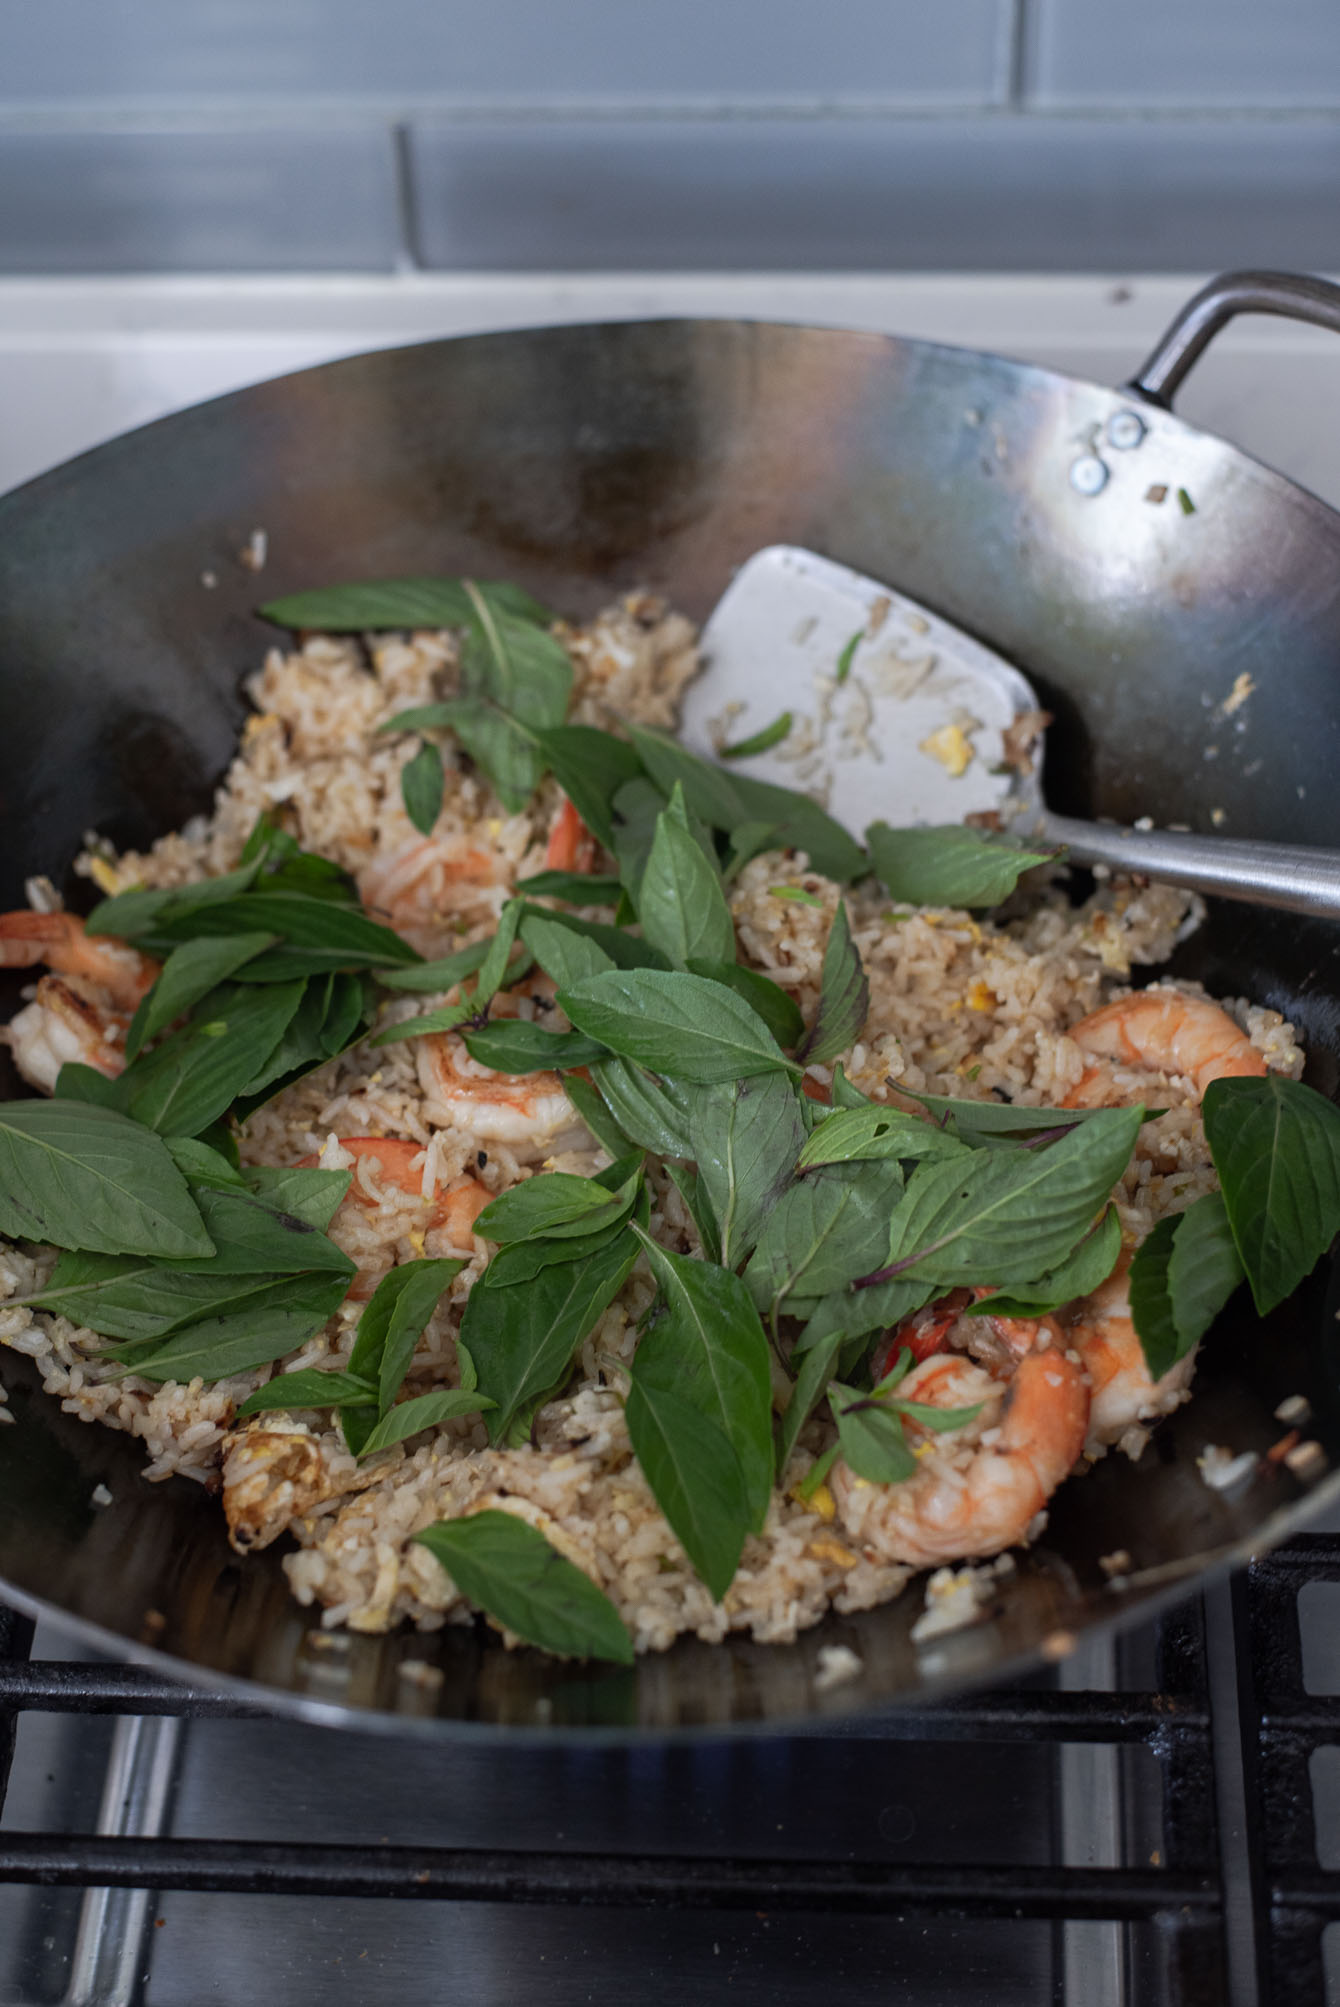 Thai basil leaves are added to the s fried rice at the end